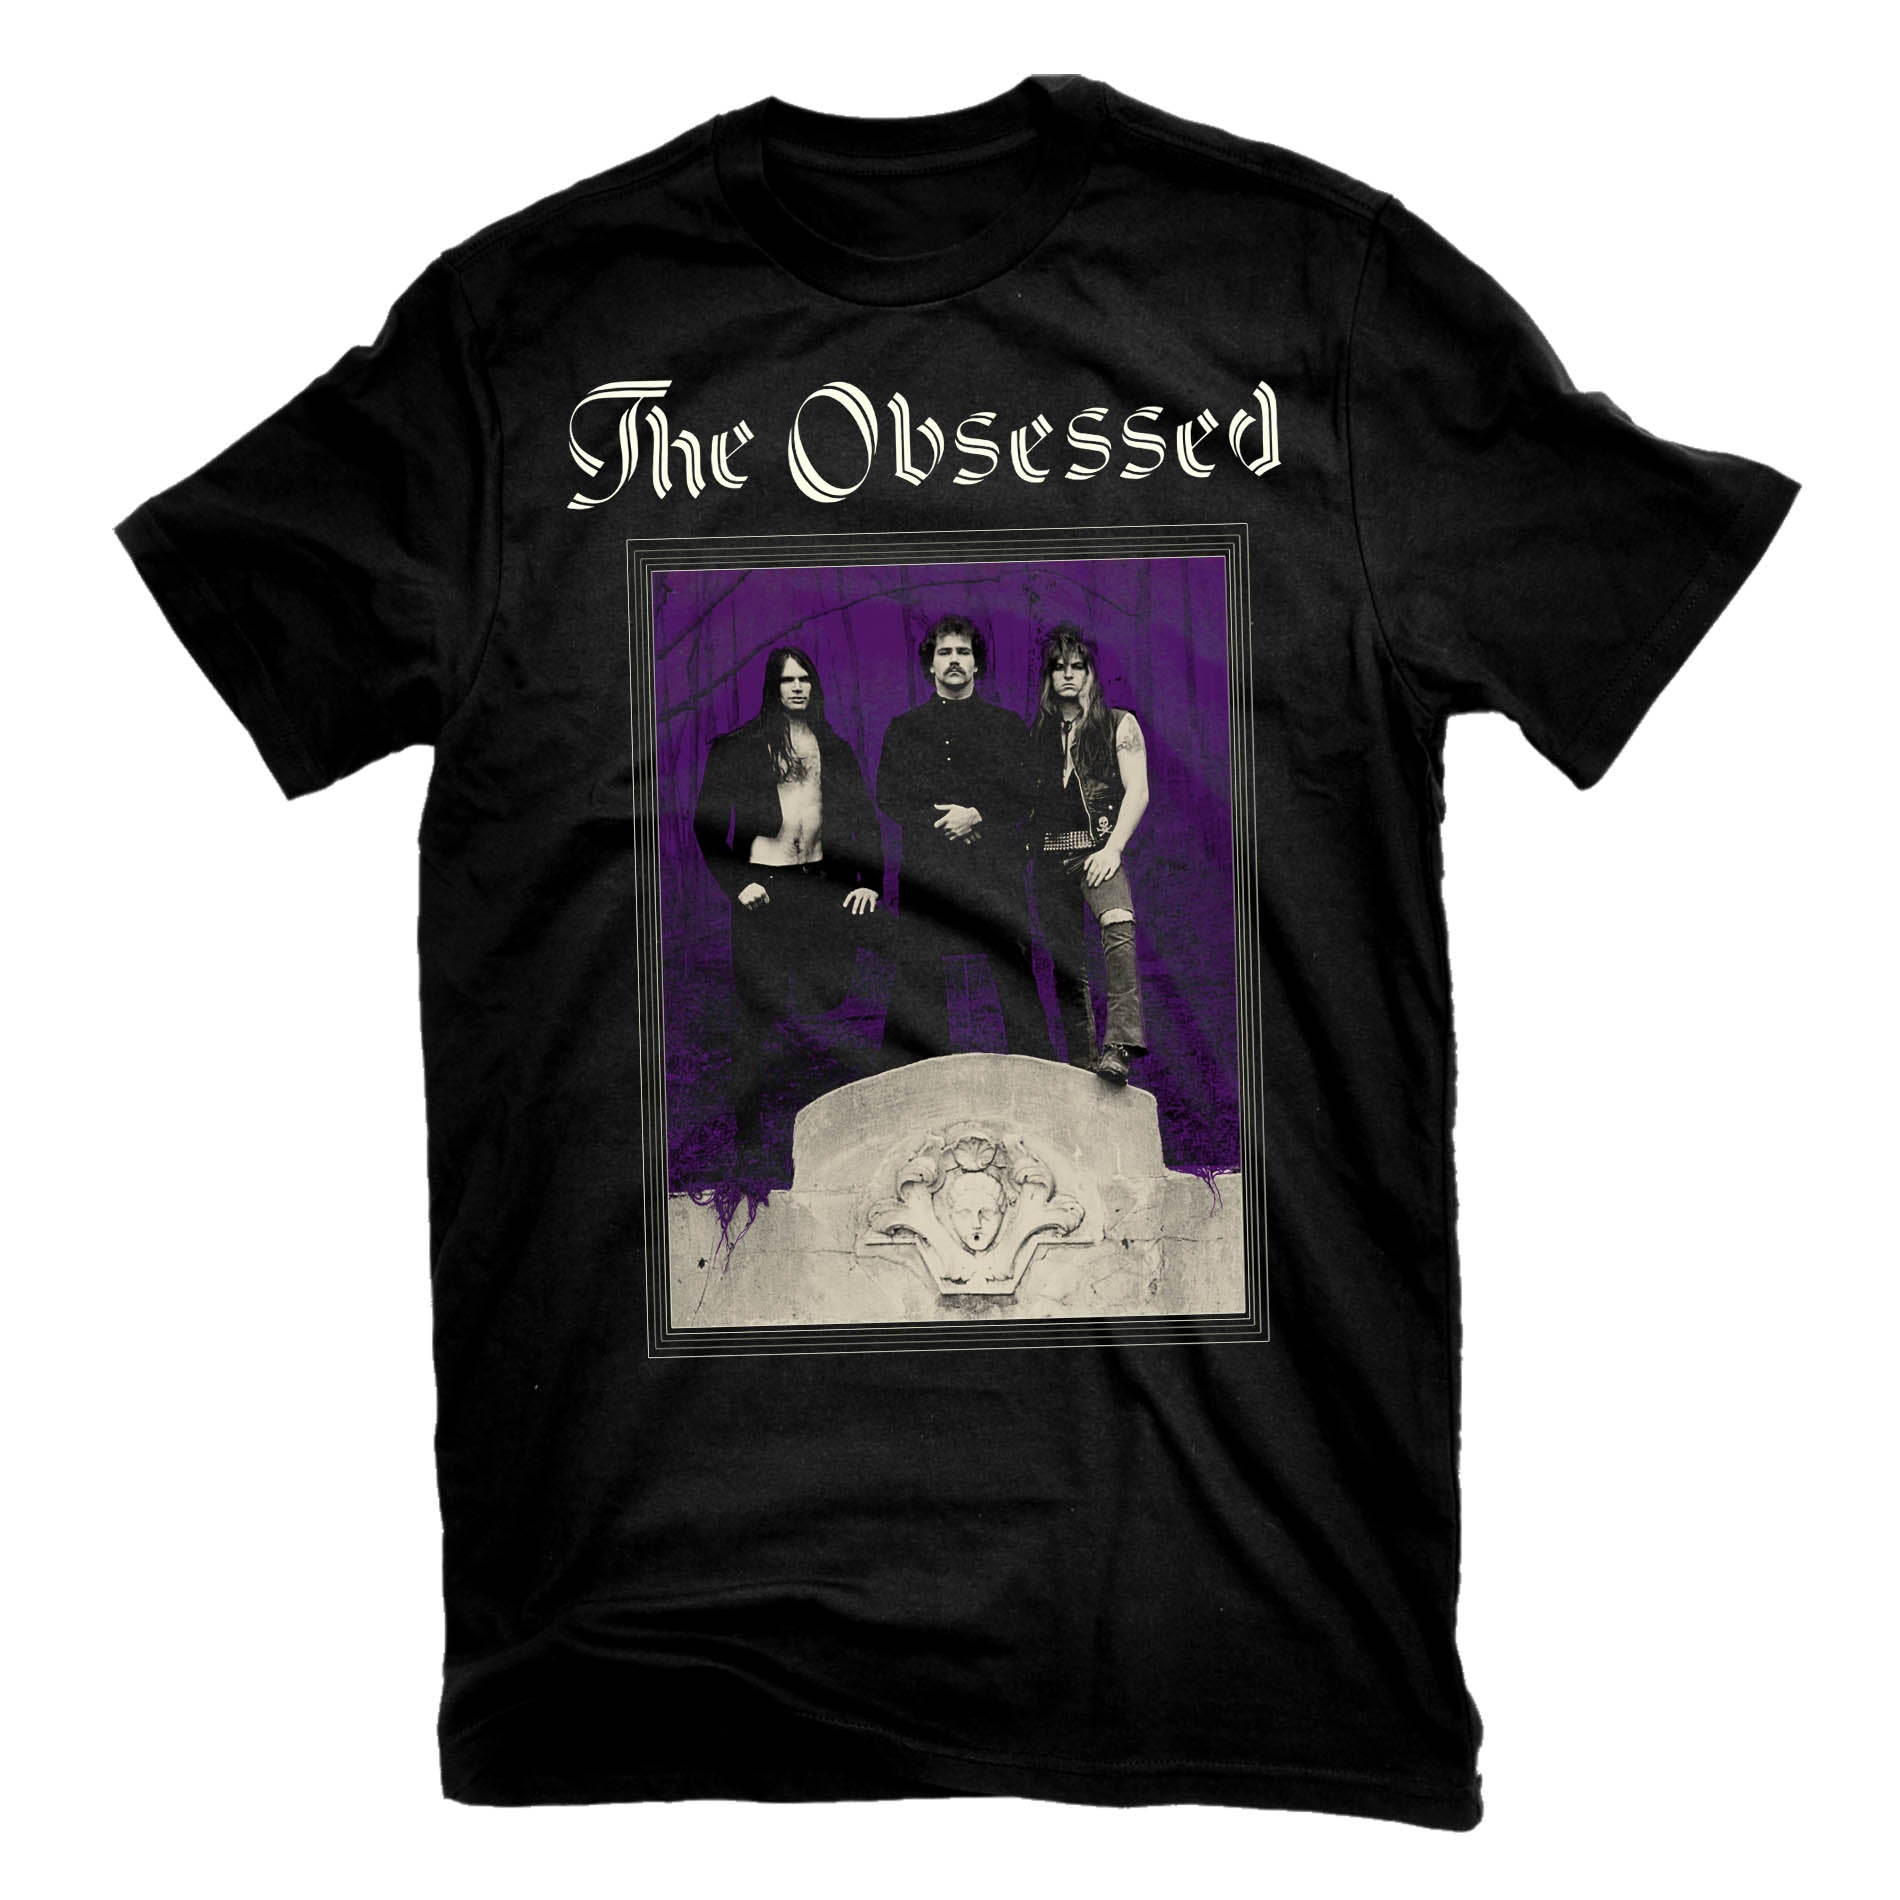 The Obsessed "The Obsessed" T-Shirt